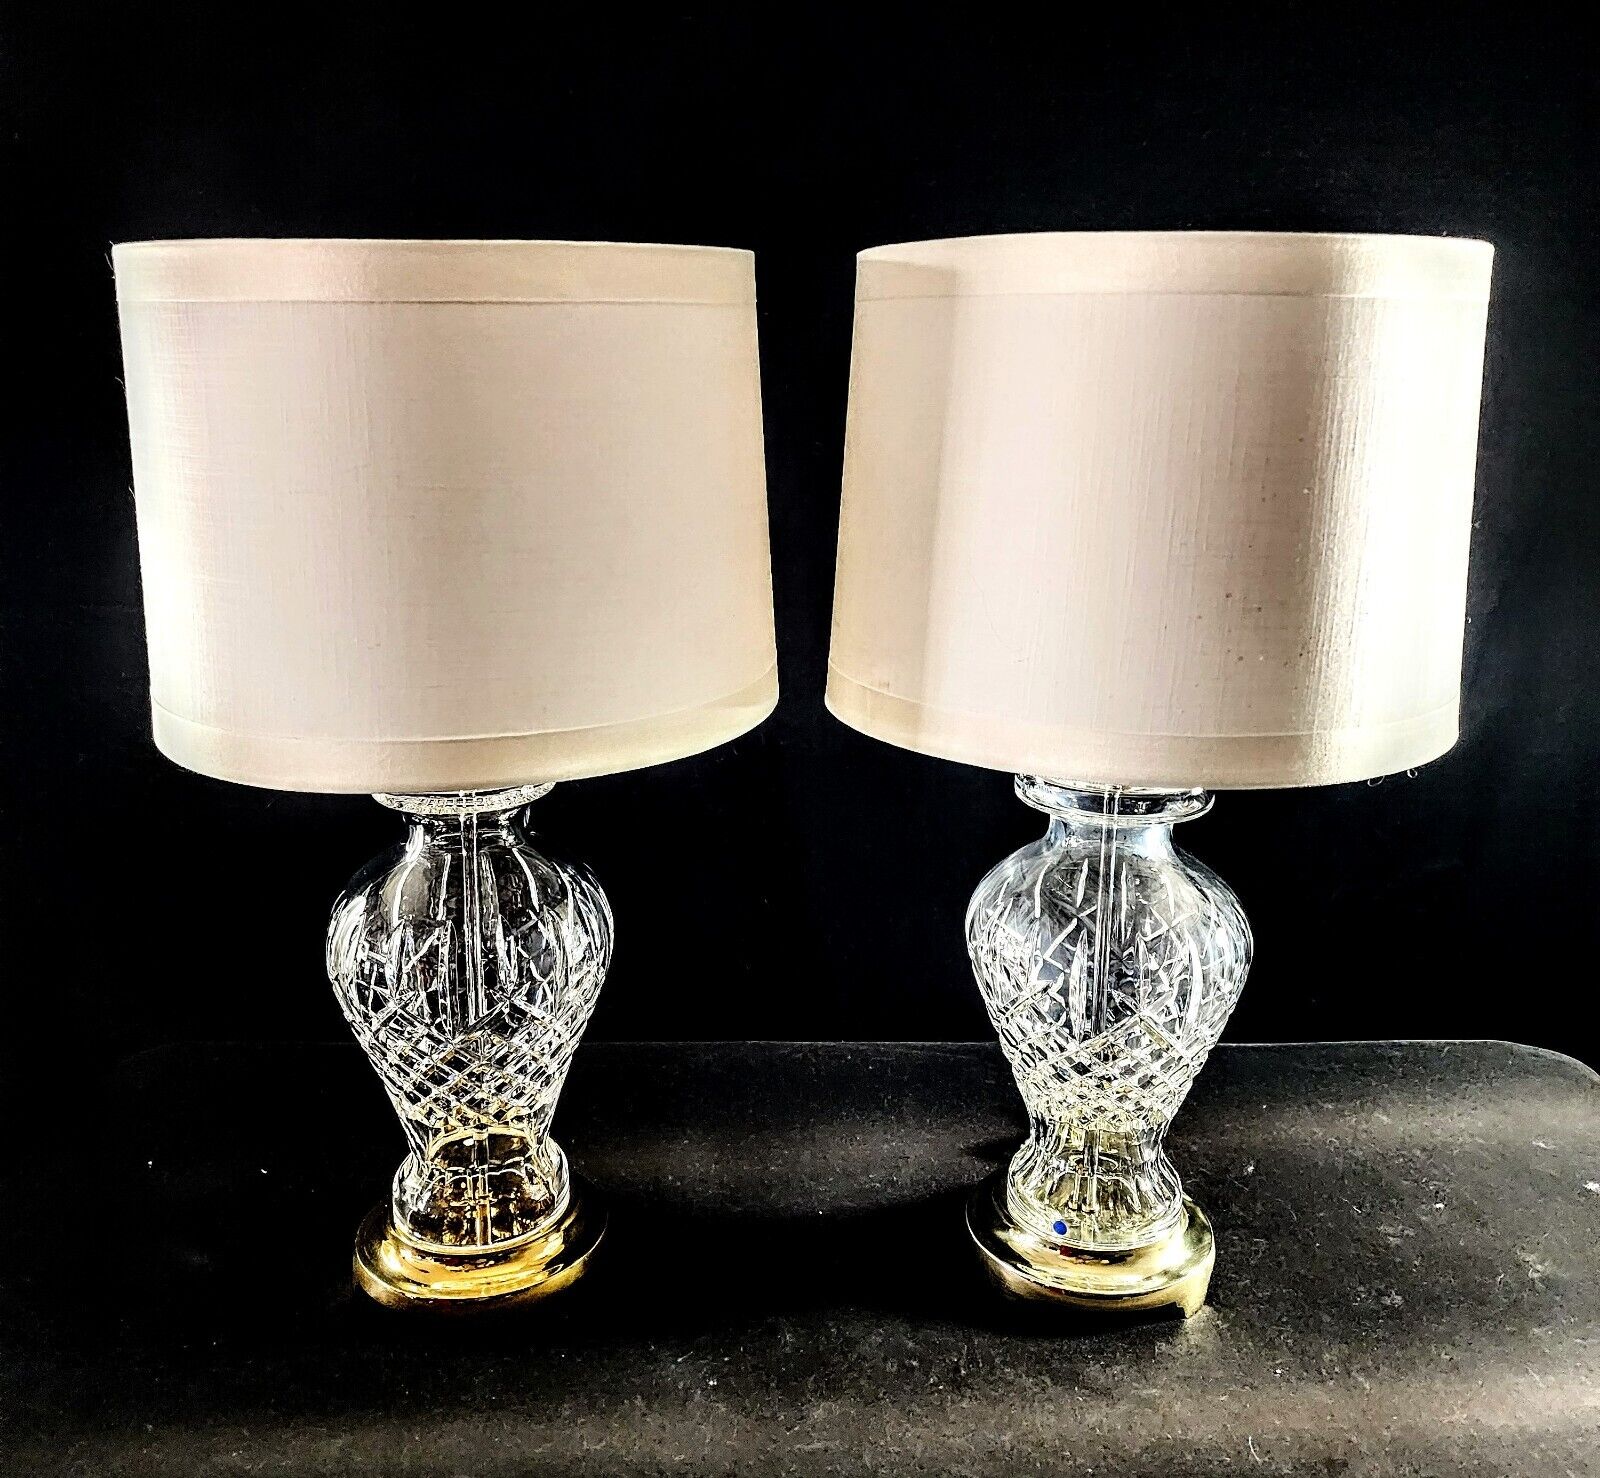 Waterford Araglin Pair of Fine Cut Irish Crystal Urn Style Table Lamps - MINT